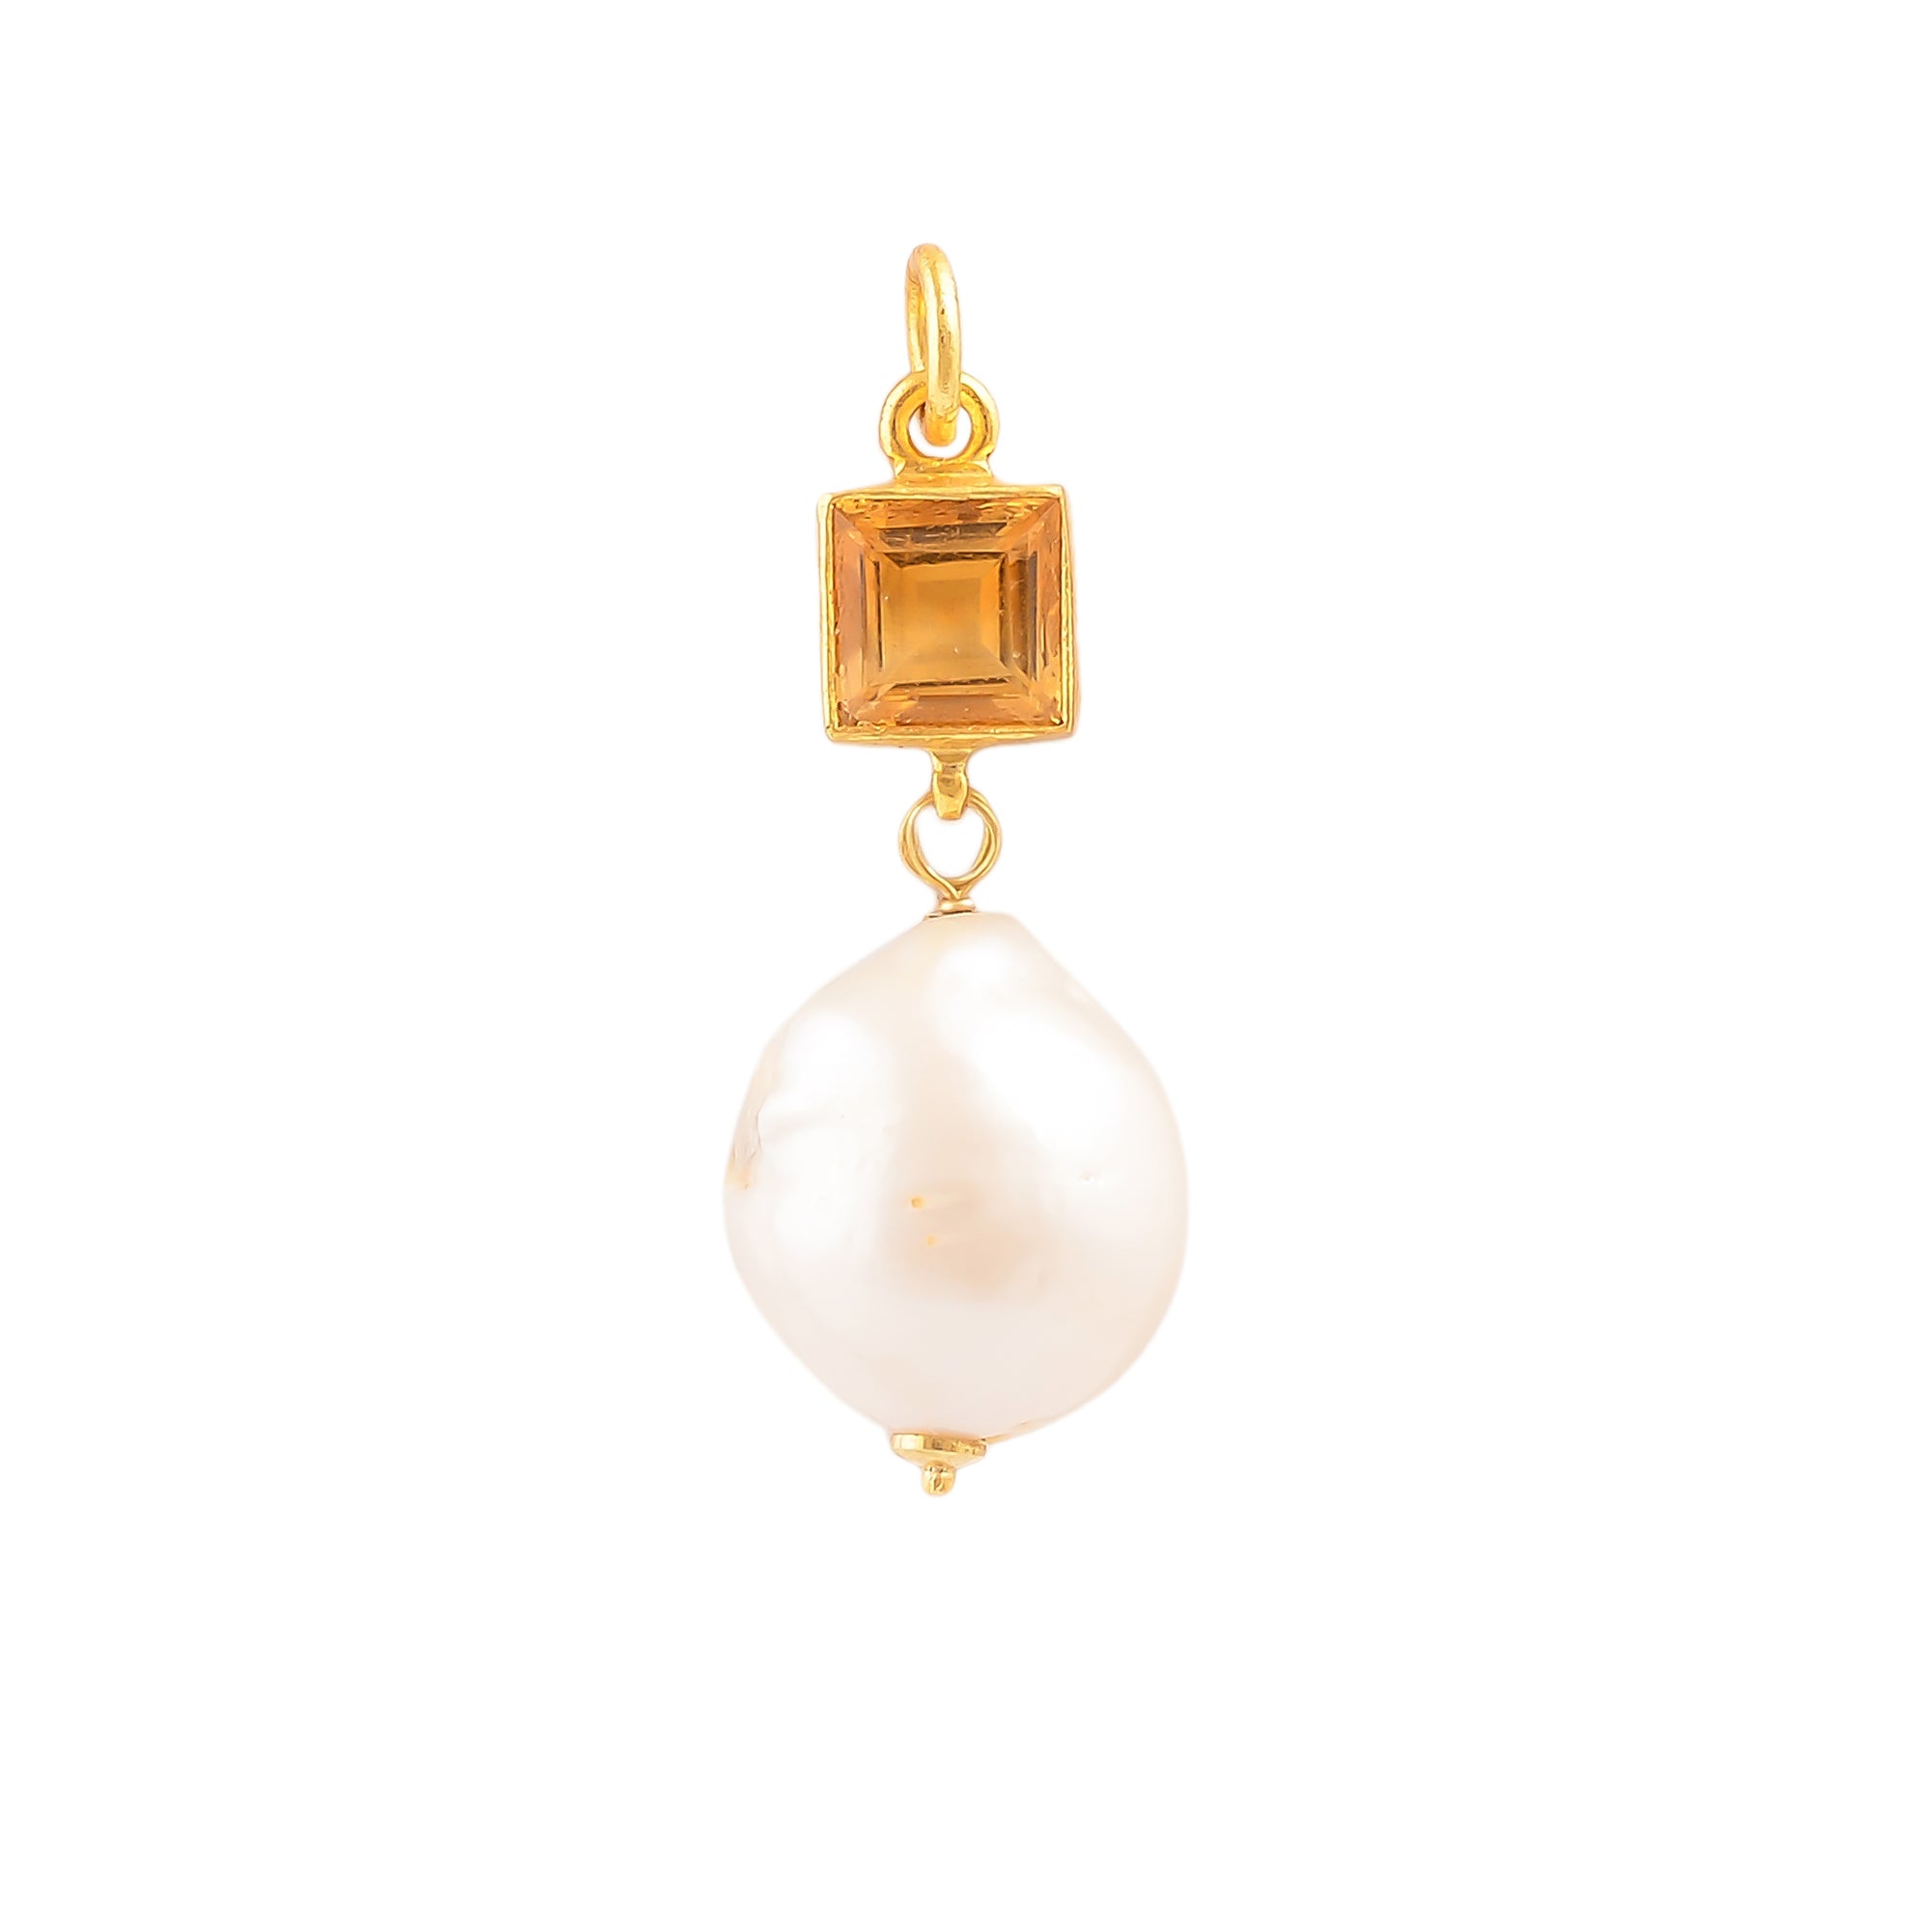 Buy Indian Handcrafted Silver Gold Plated Citrine/pearl Pendant